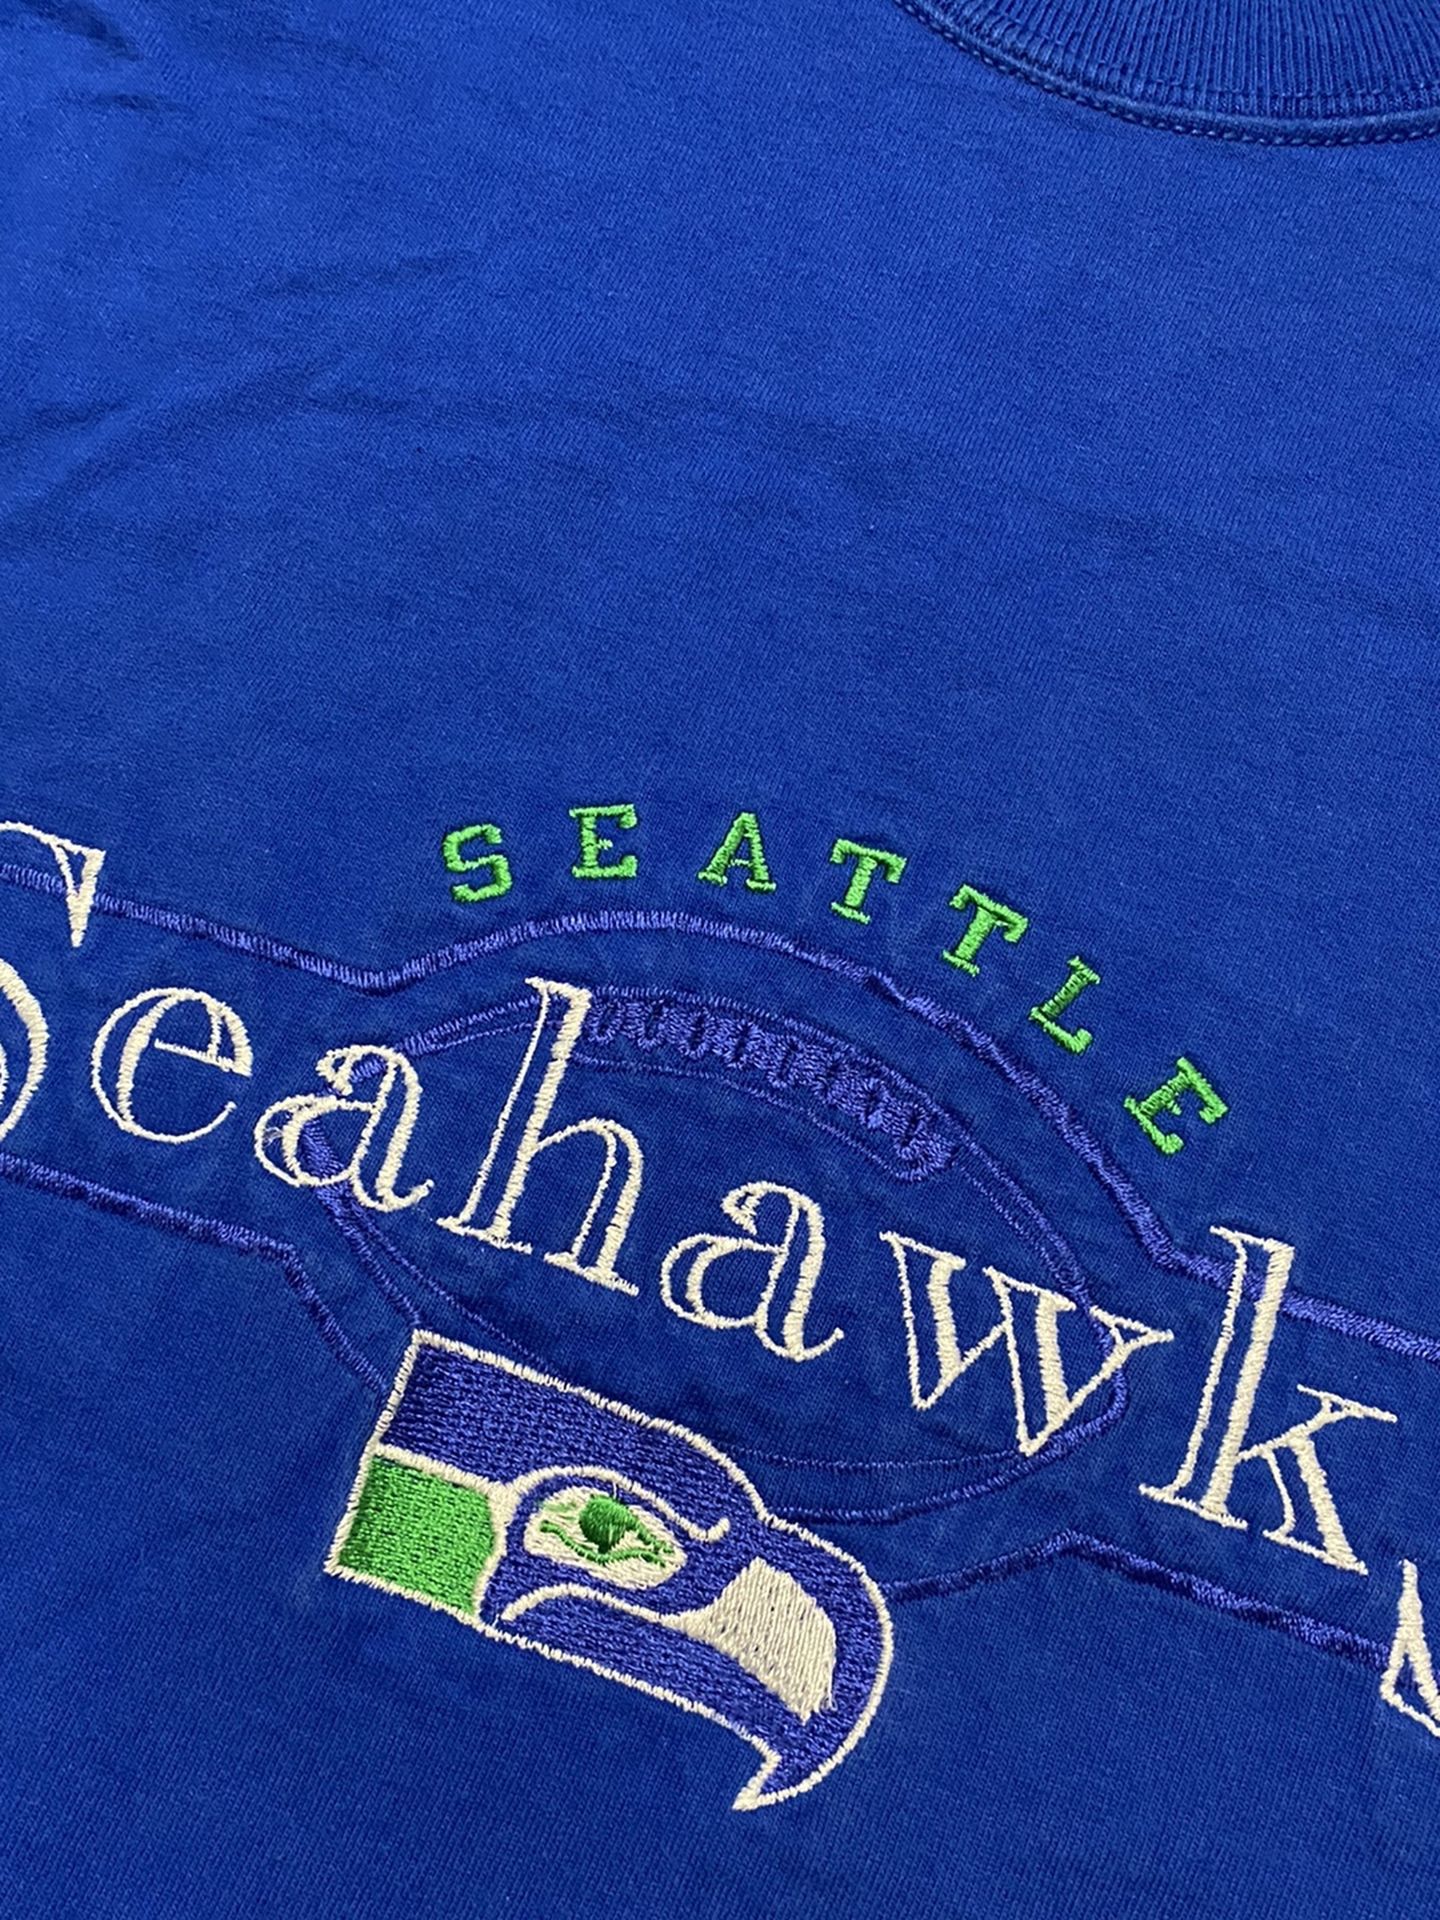 Vintage Pro Player Seattle Seahawks Embroidered Tee Shirt XL 80’s 90’s